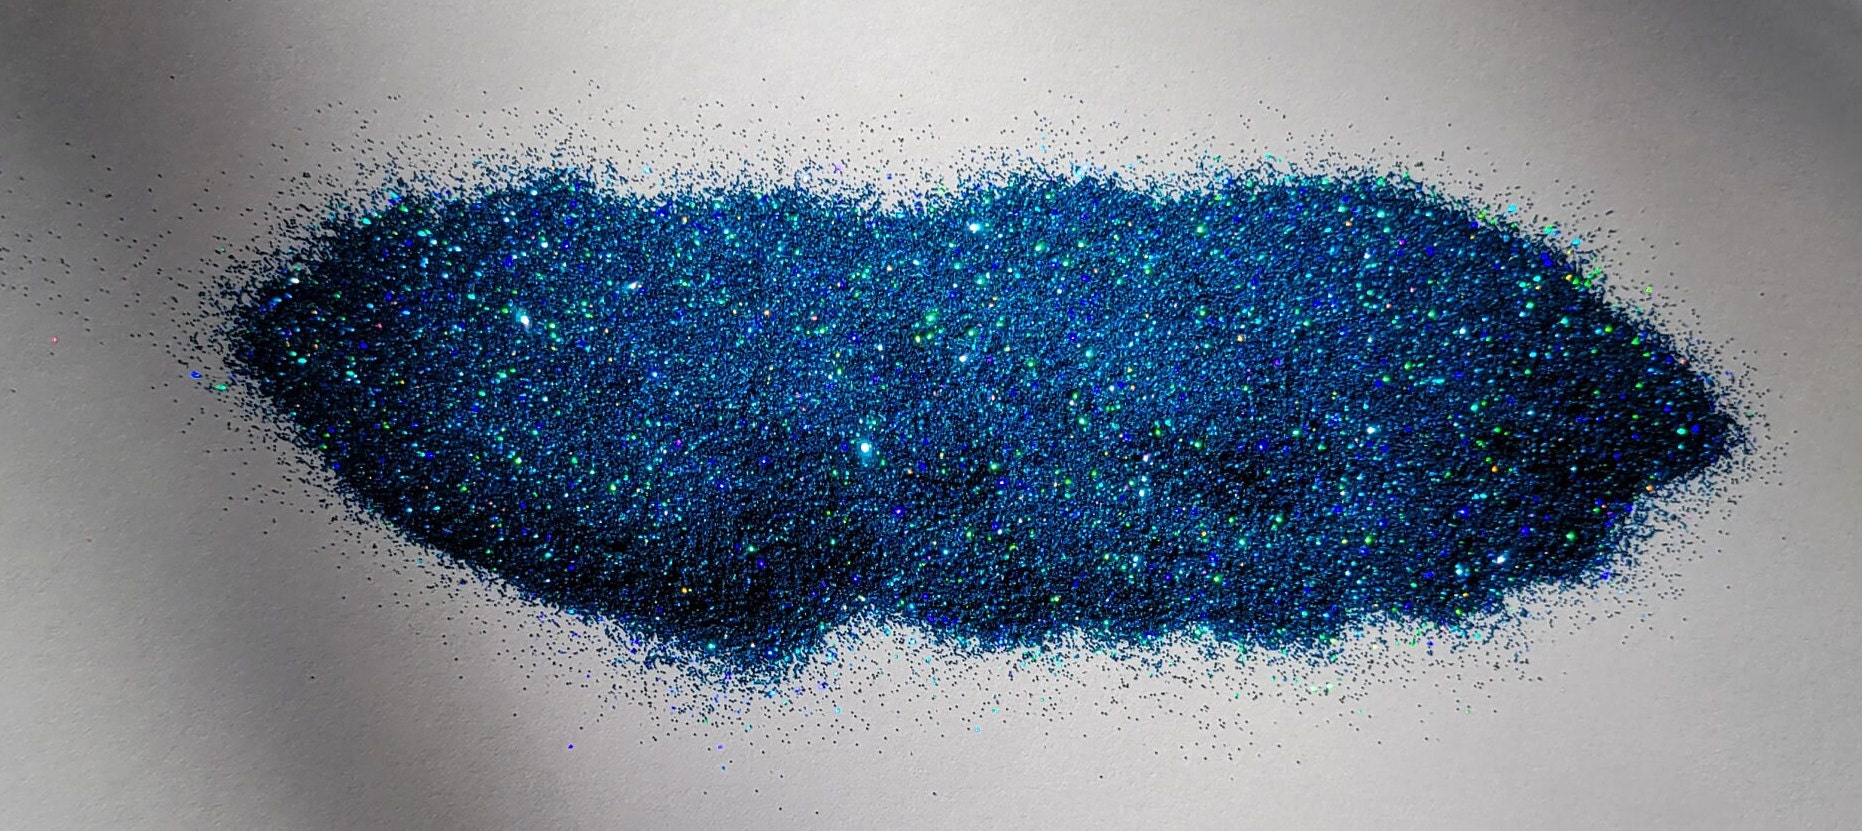 Lochness - .2mm Holographic lake blue Extra Fine Glitter - 2oz